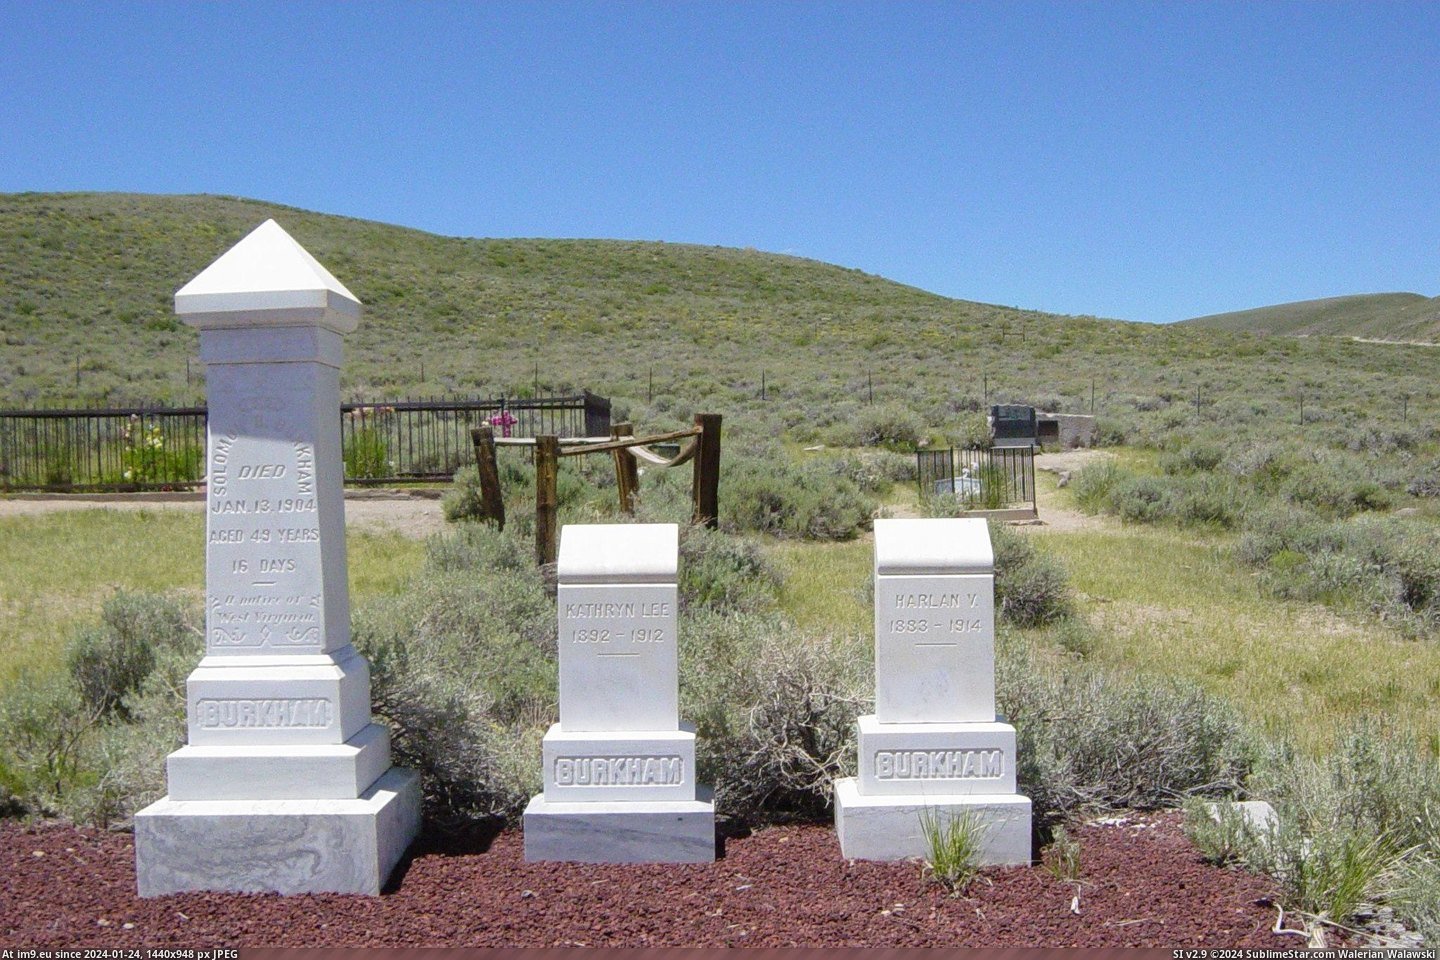 #Bodie  #Cemetery5 Bodie Cemetery5 Pic. (Изображение из альбом Bodie - a ghost town in Eastern California))